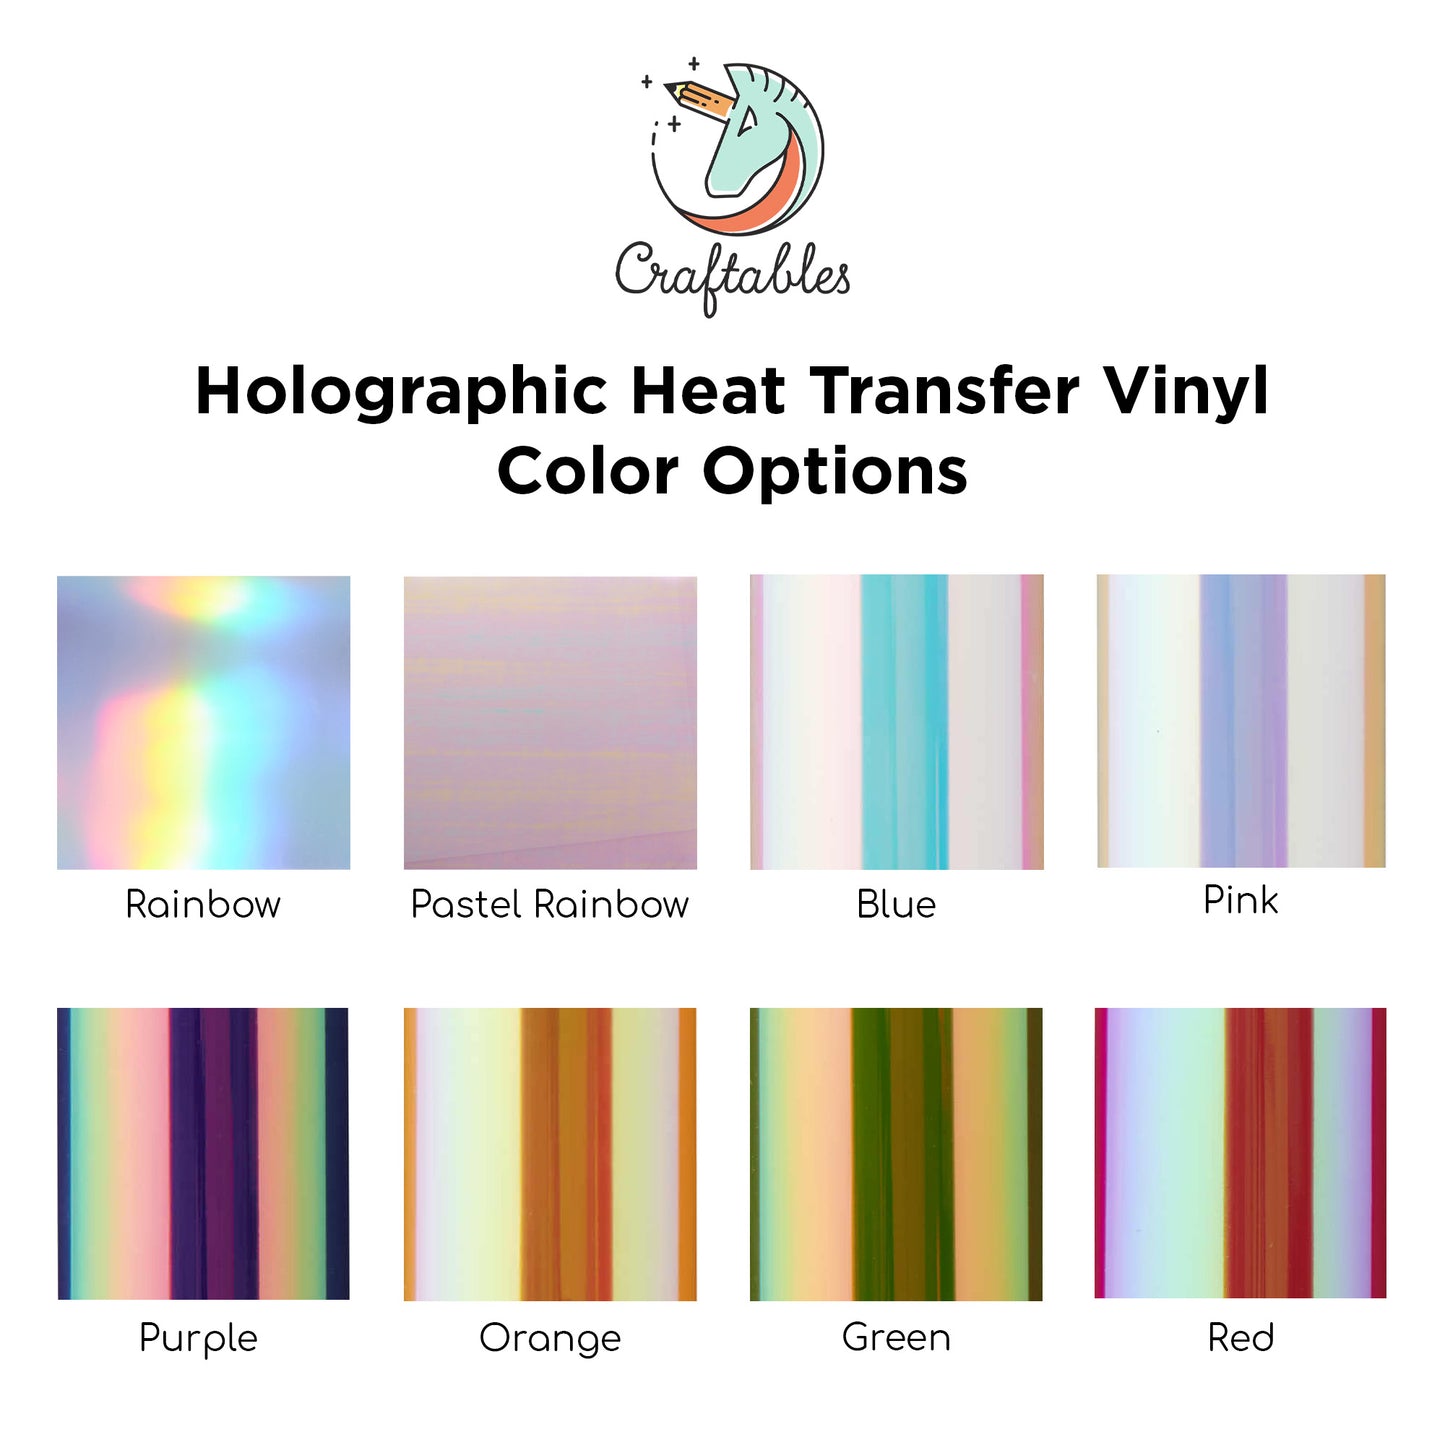 Green Holographic Heat Transfer Vinyl Rolls By Craftables